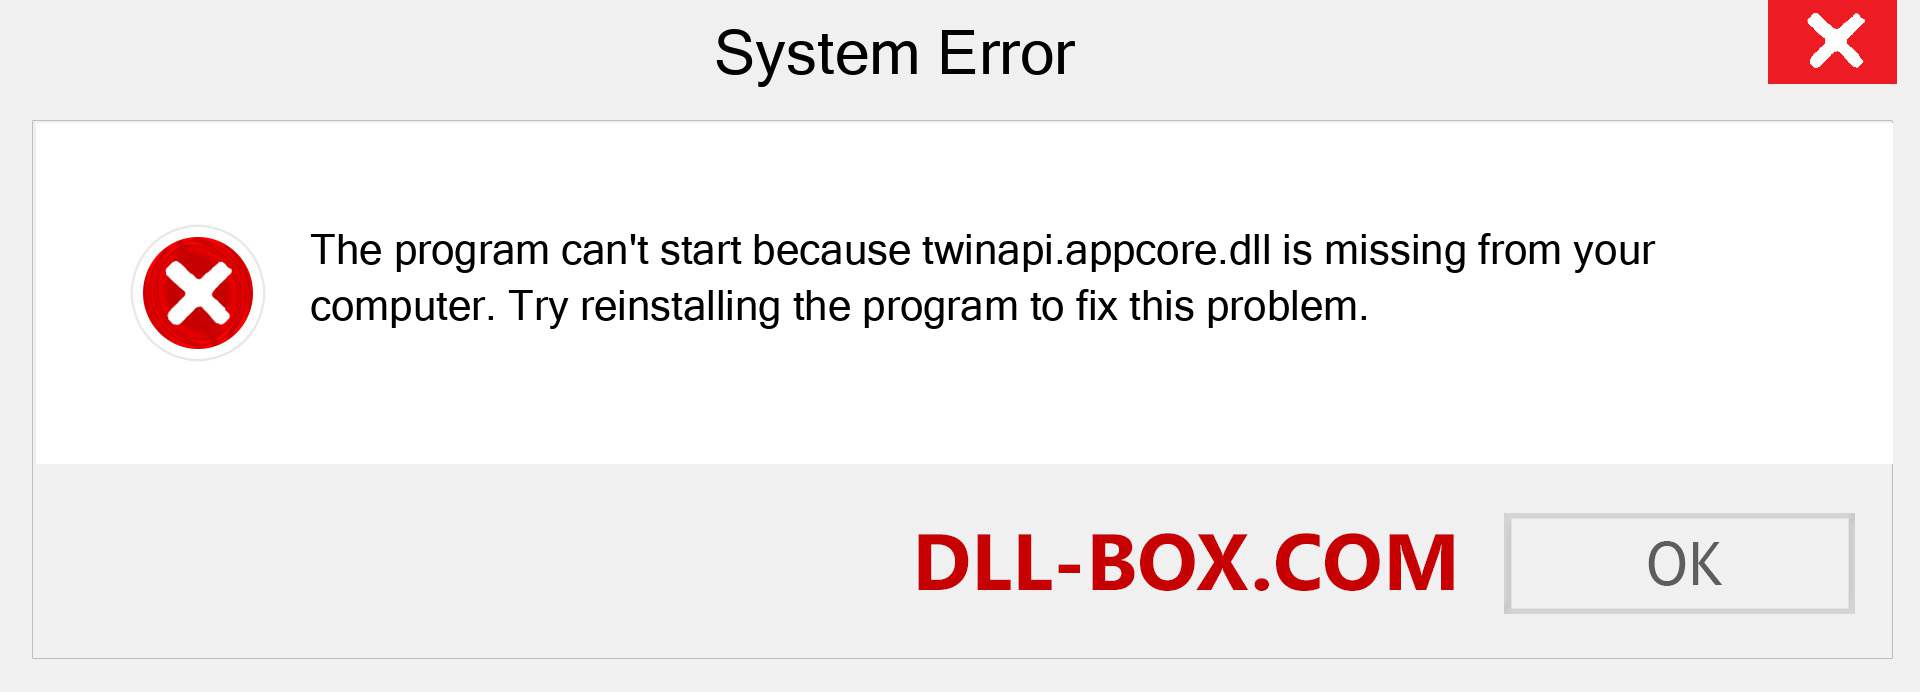  twinapi.appcore.dll file is missing?. Download for Windows 7, 8, 10 - Fix  twinapi.appcore dll Missing Error on Windows, photos, images